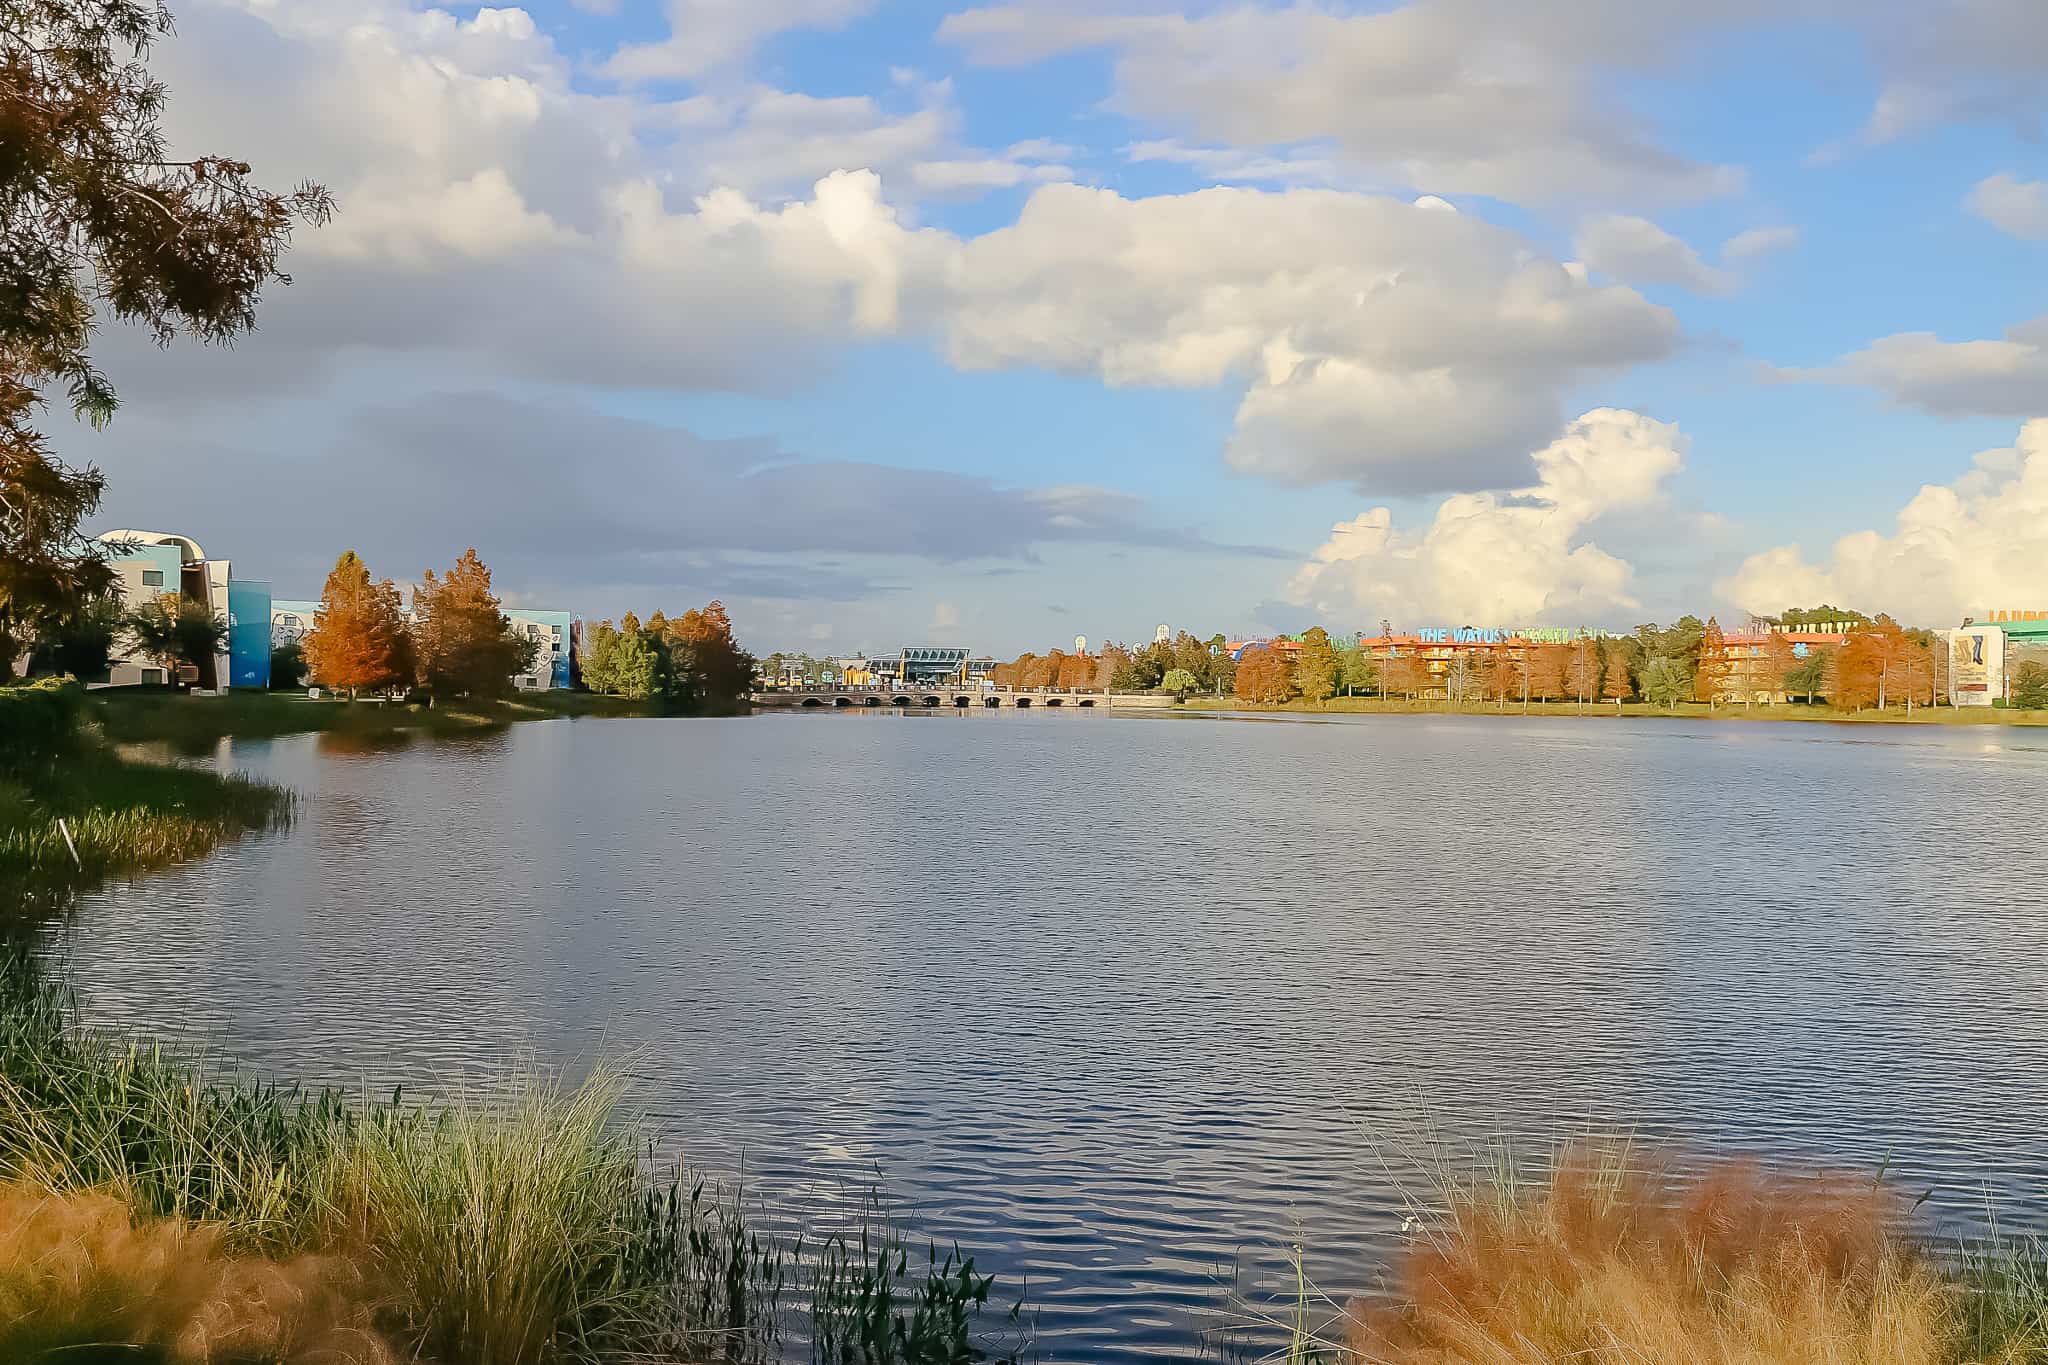 Hourglass Lake as seen from the jogging trail at Art of Animation 